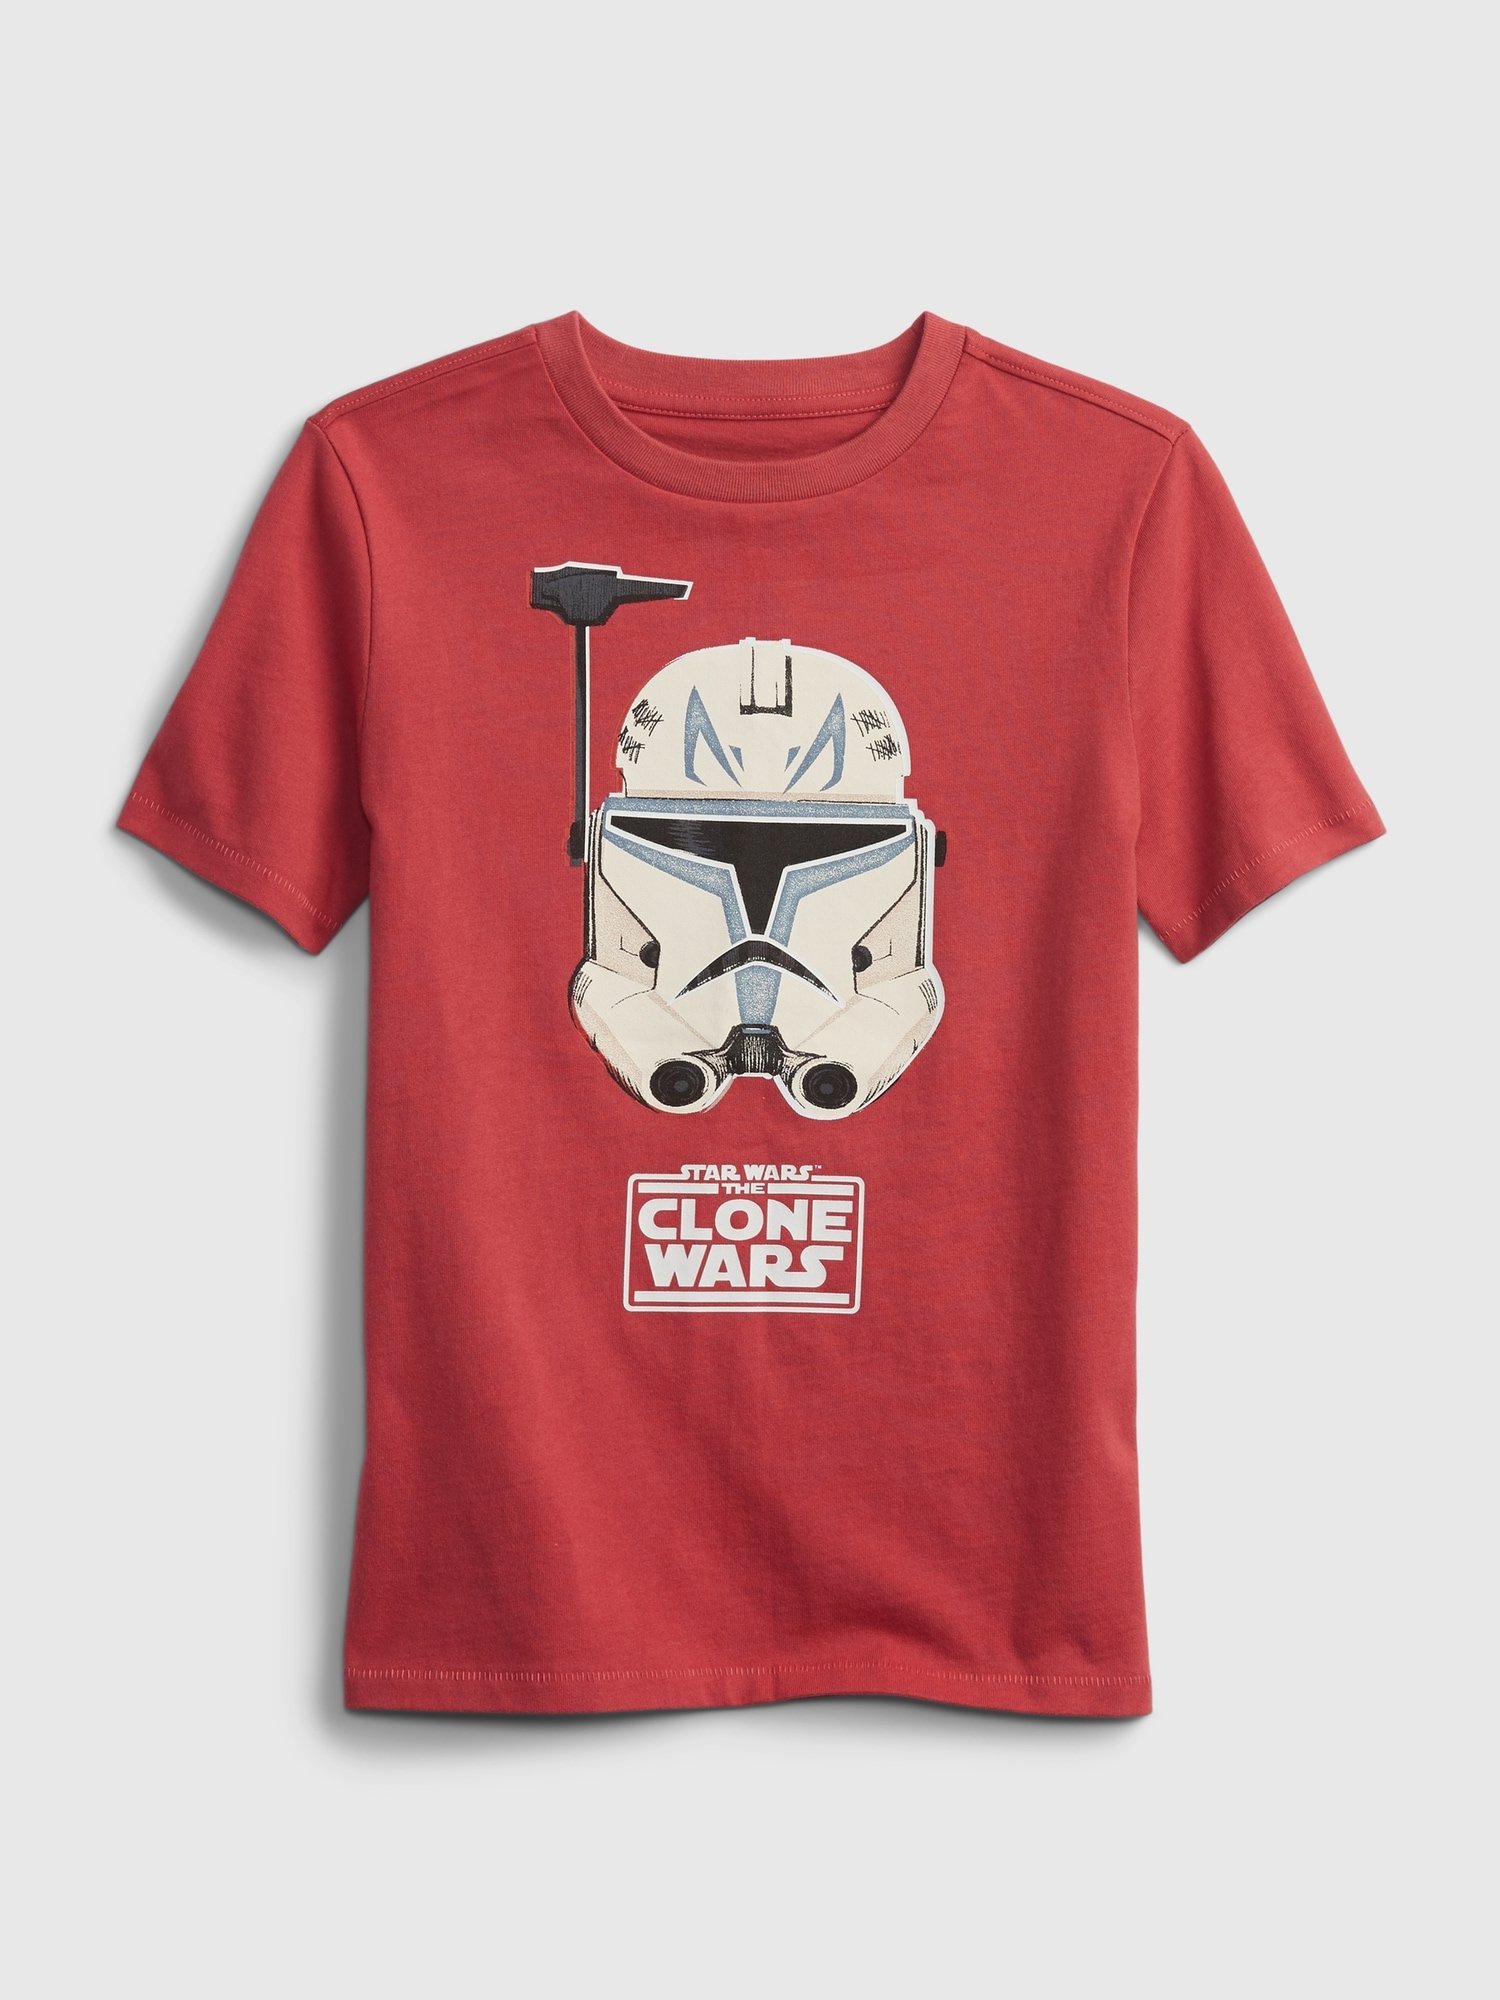 Star Wars™ Graphic T-Shirt product image